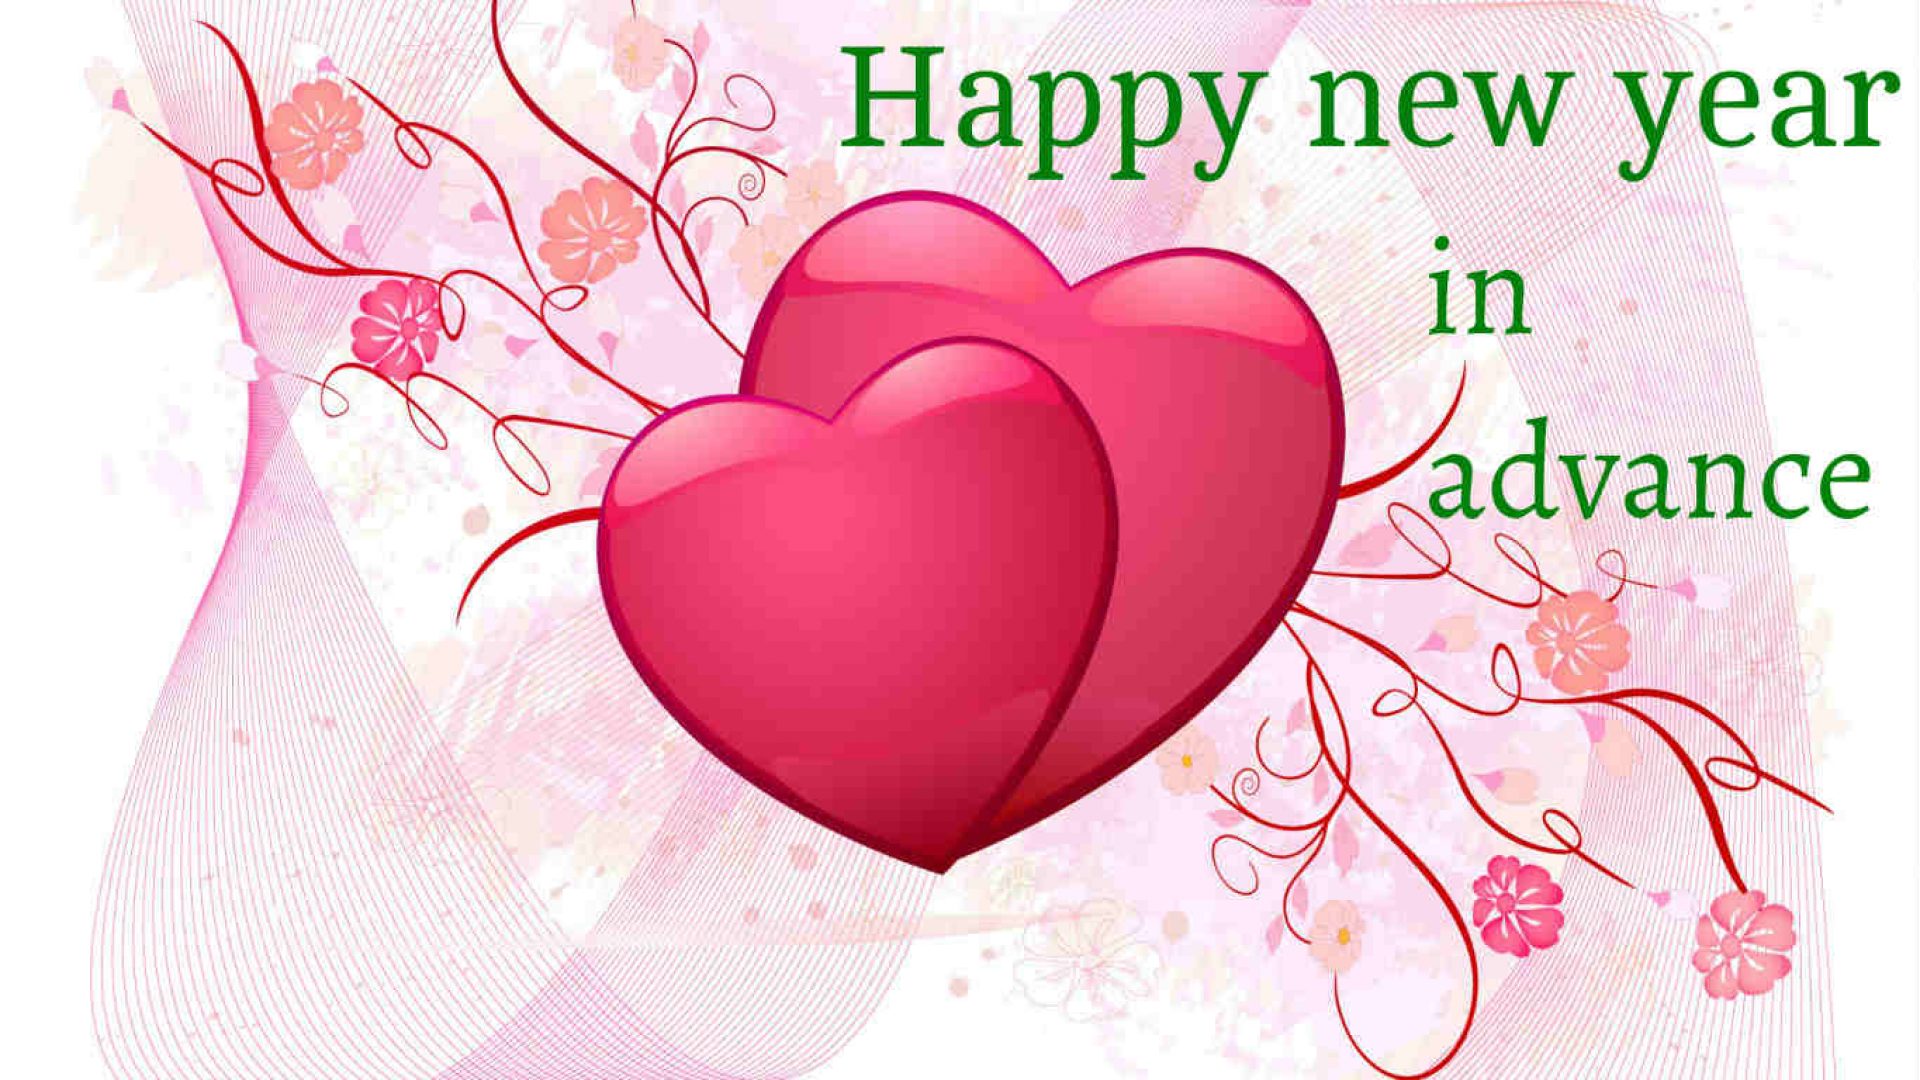 Happy New Year In Advance Images In Hindi | Festivals